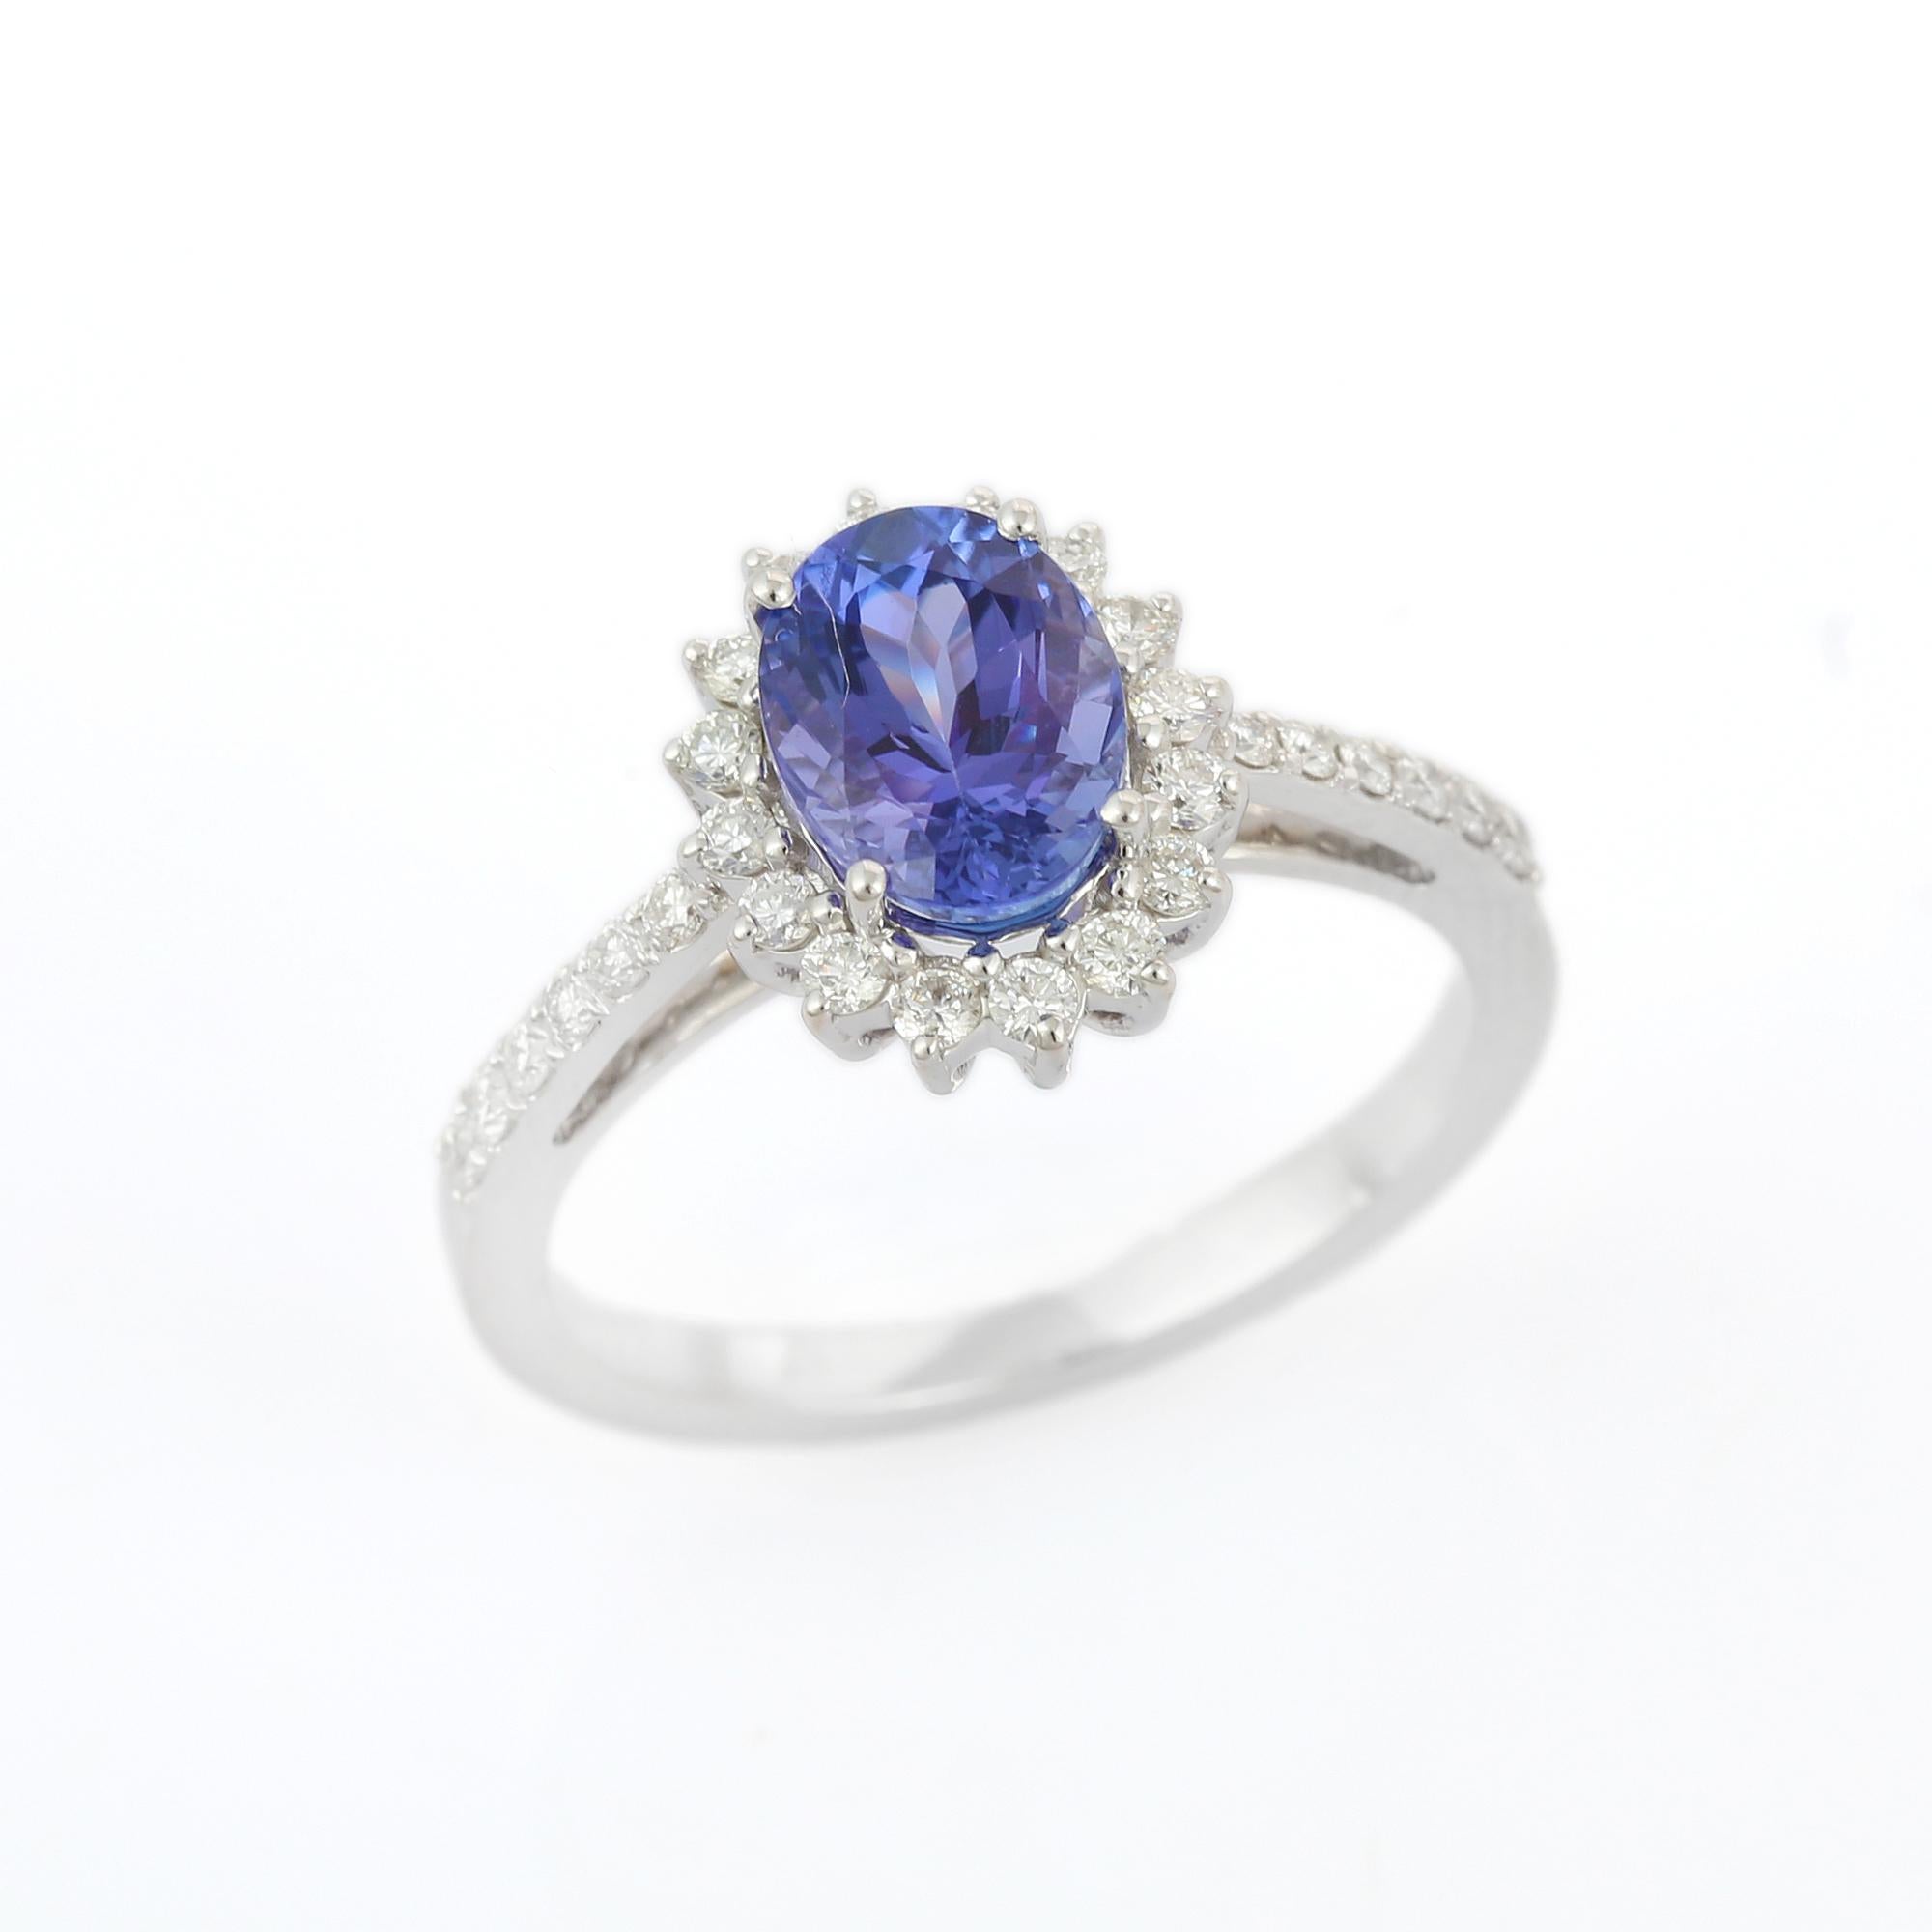 For Sale:  1.59 Carat Natural Tanzanite and Diamond Ring in 18k Solid White Gold 3